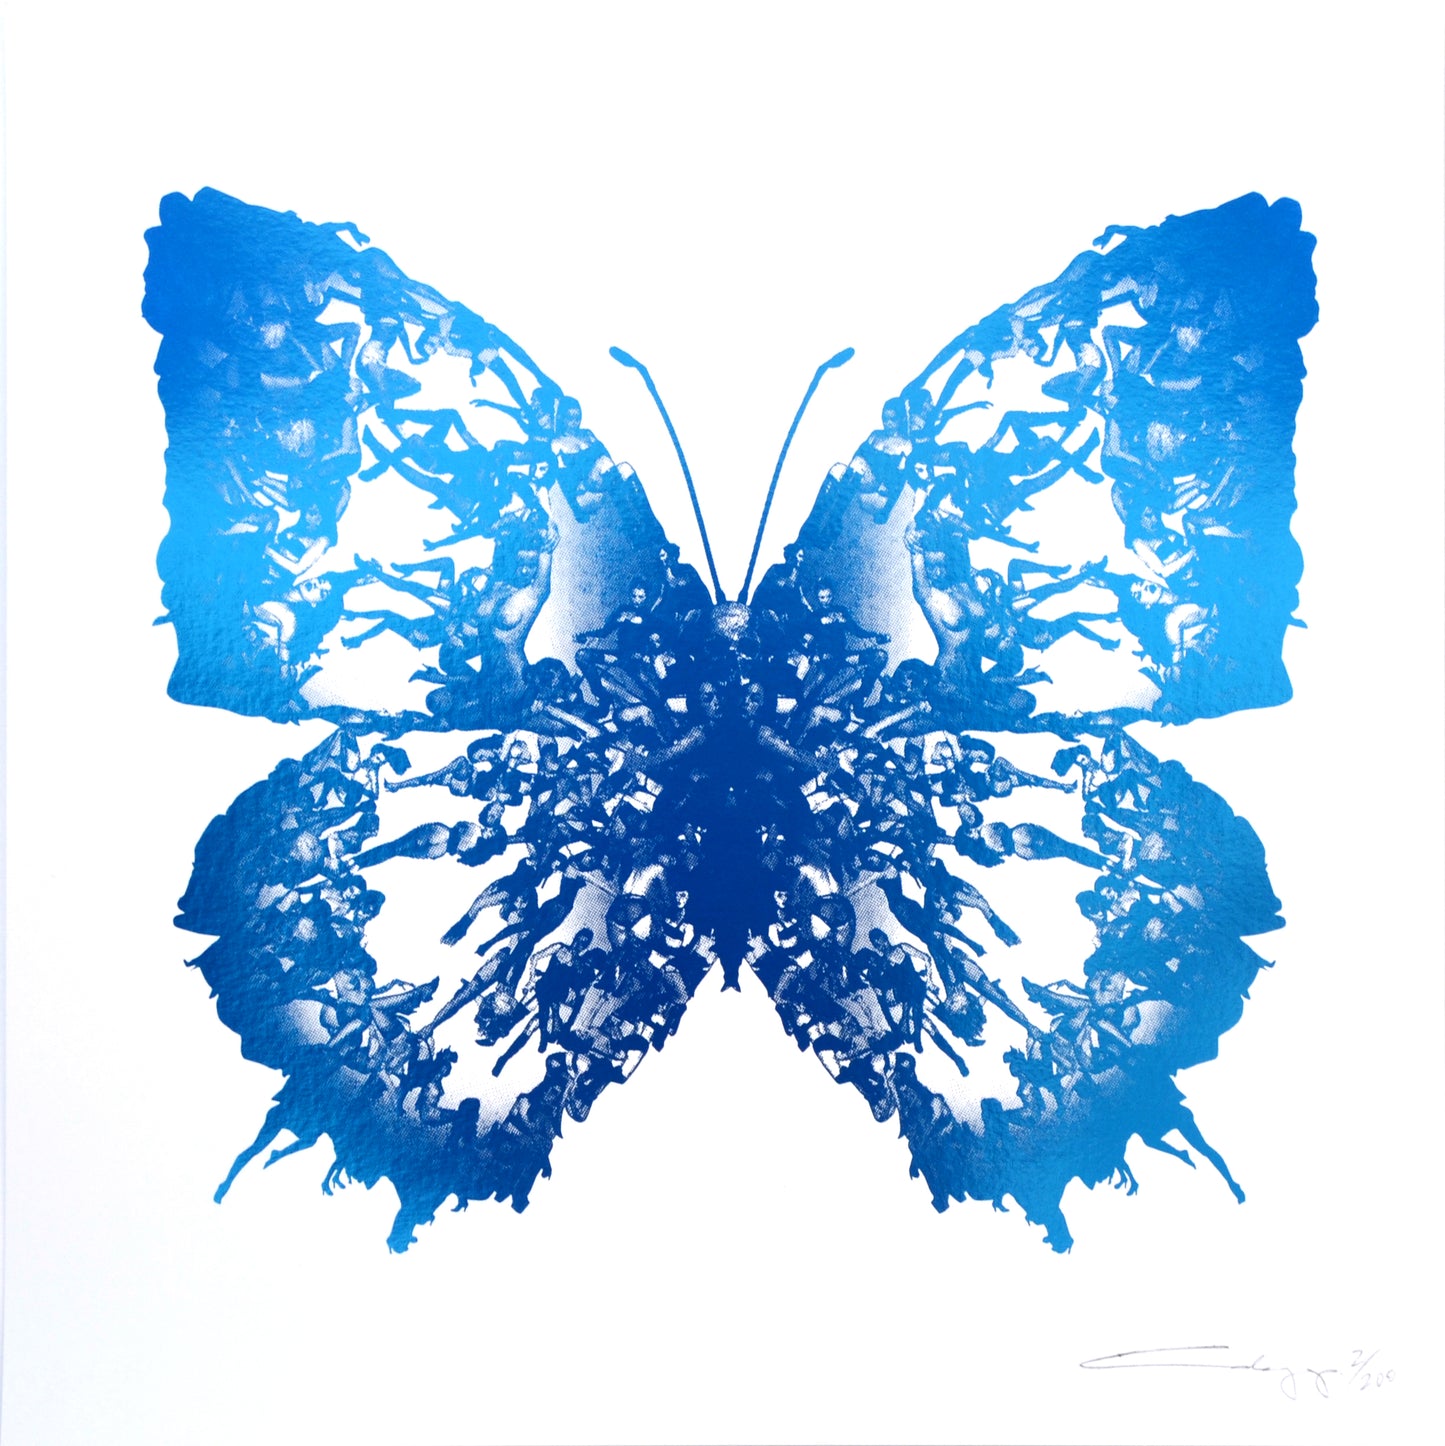 Cassandra-Yap-TAP-Galleries-White-Blue-Foil-Limited-Edition-Screenprint-Butterfly 